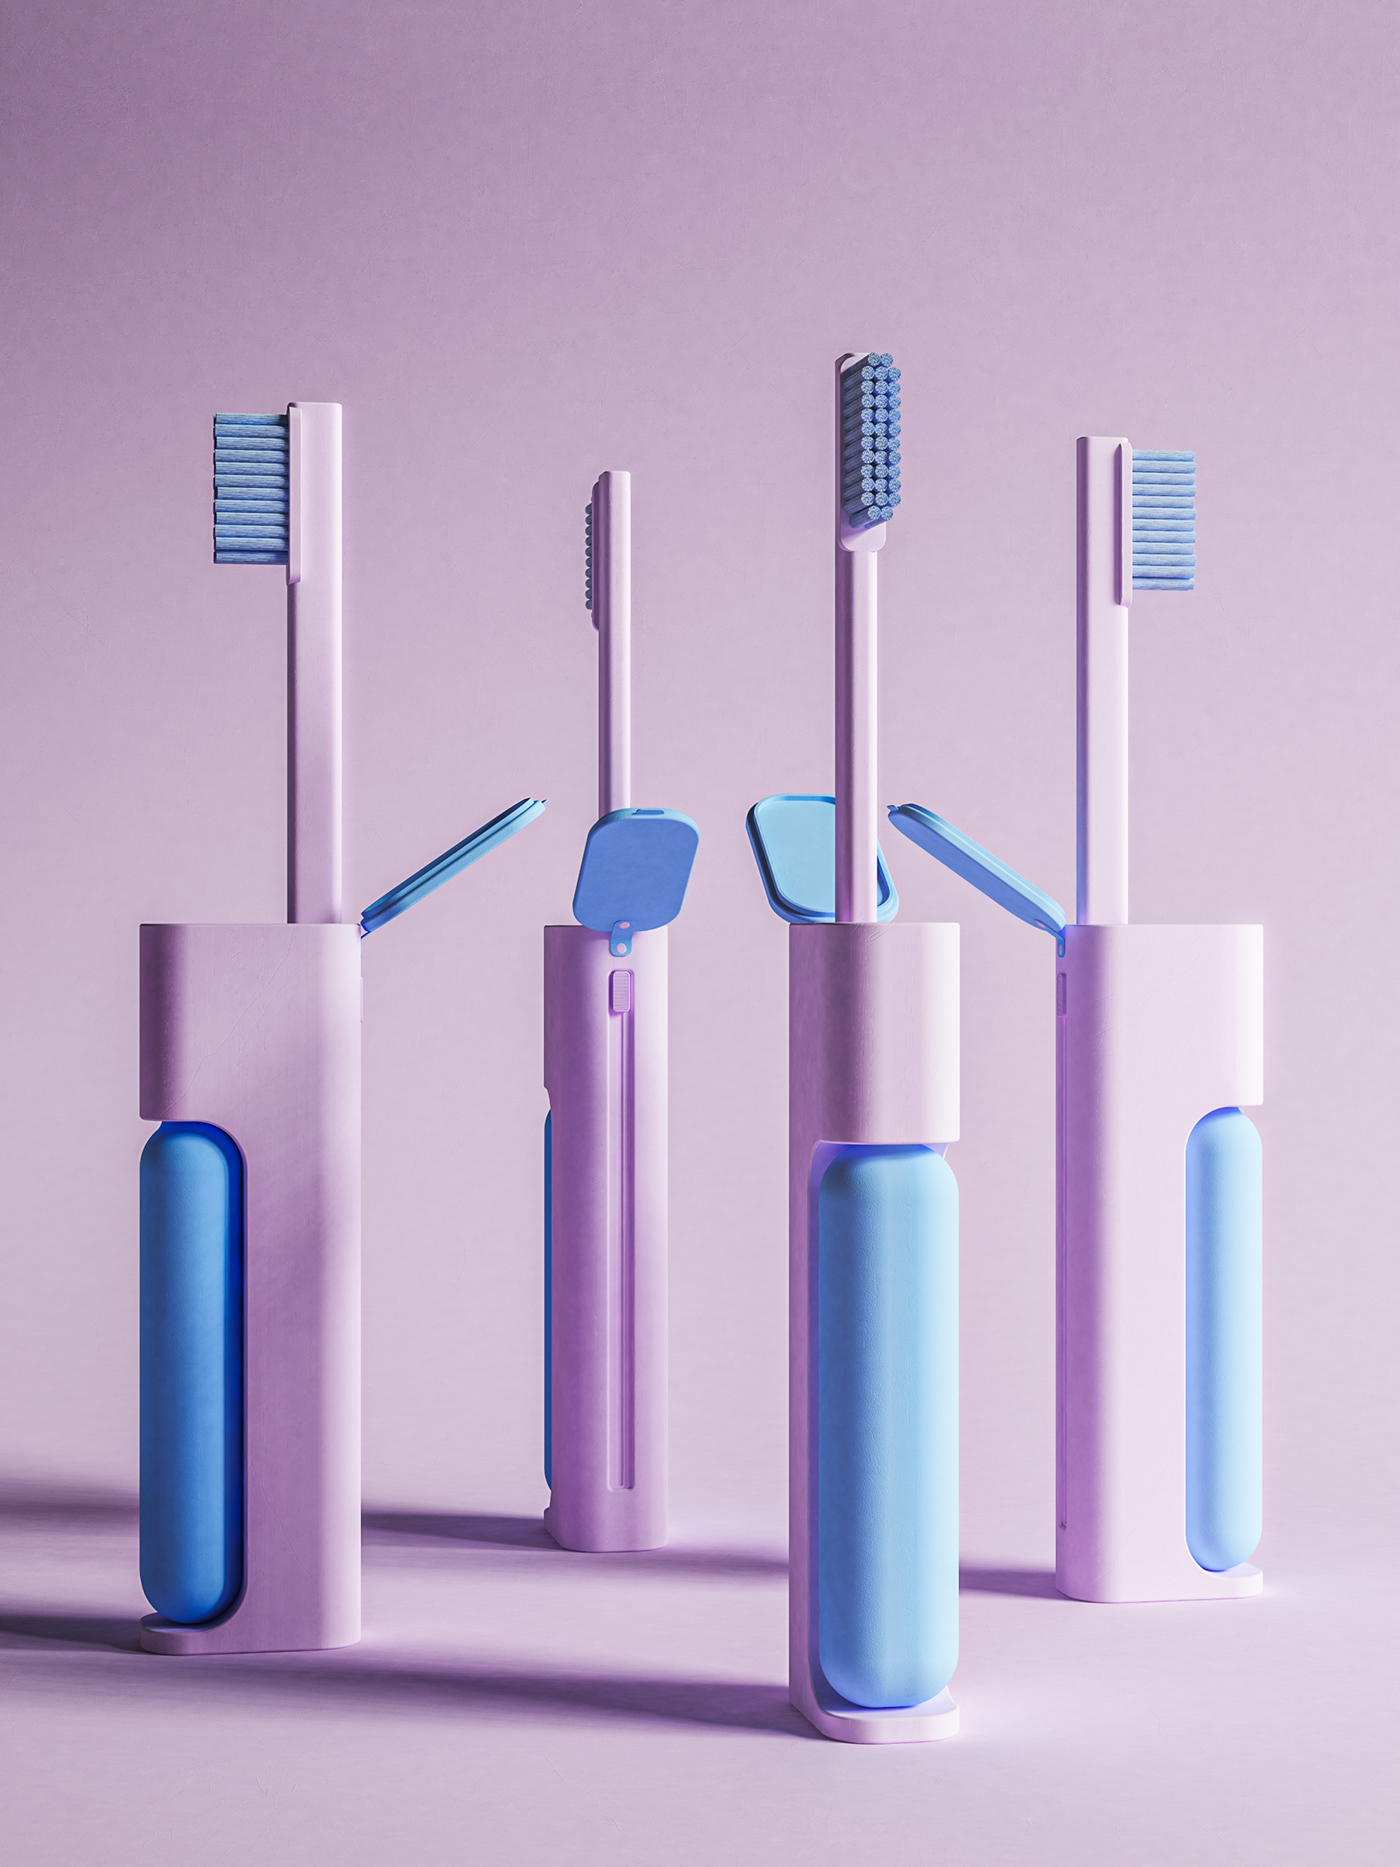 industrial design  product design  toothbrush ID dental product design product concept